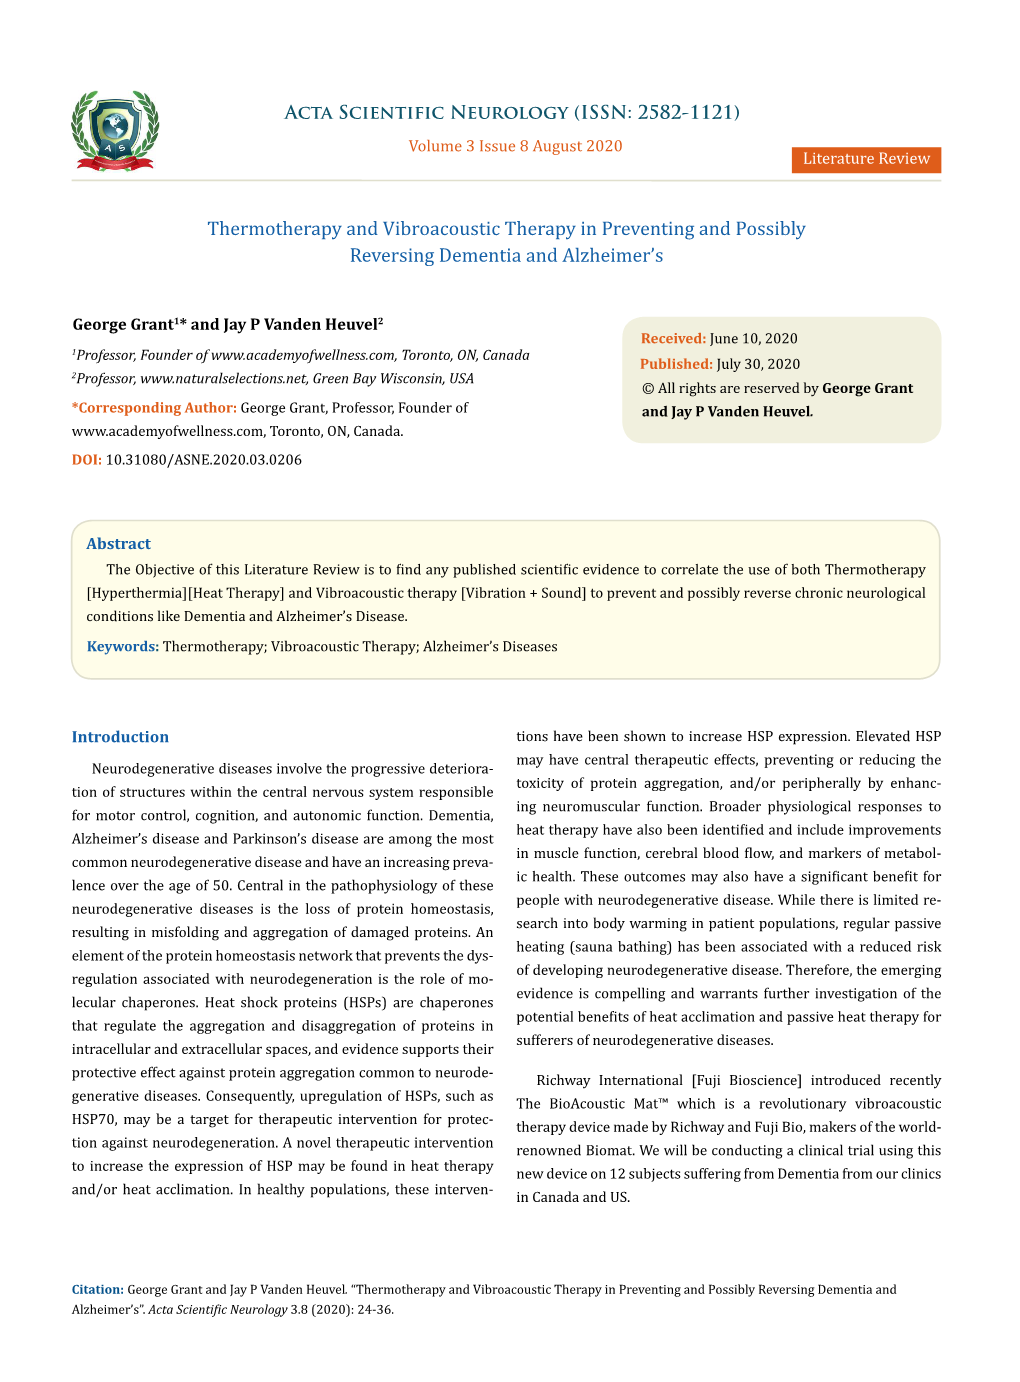 Thermotherapy and Vibroacoustic Therapy in Preventing and Possibly Reversing Dementia and Alzheimer's